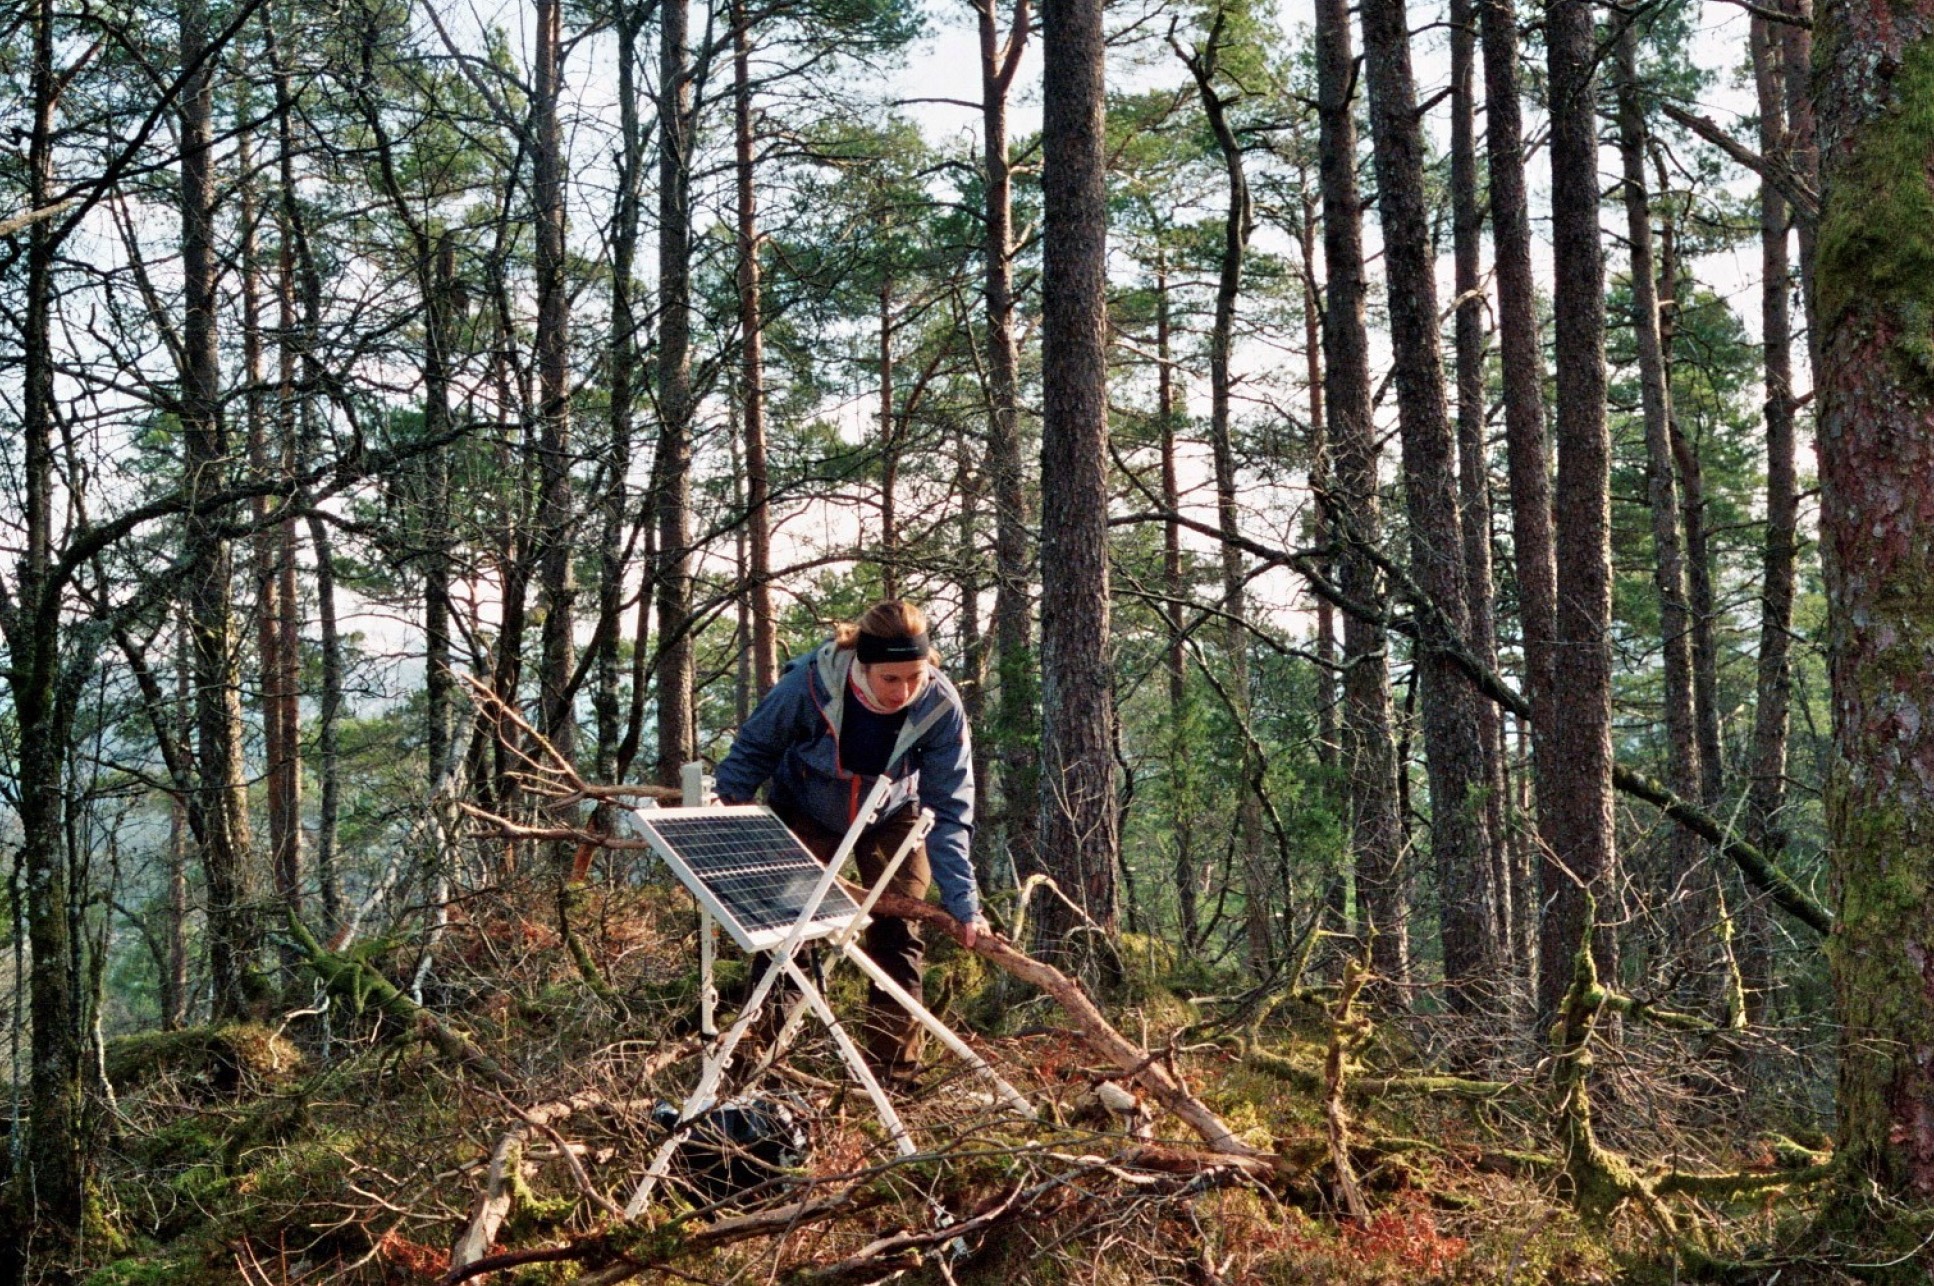 A woman setting up a solar panel among trees